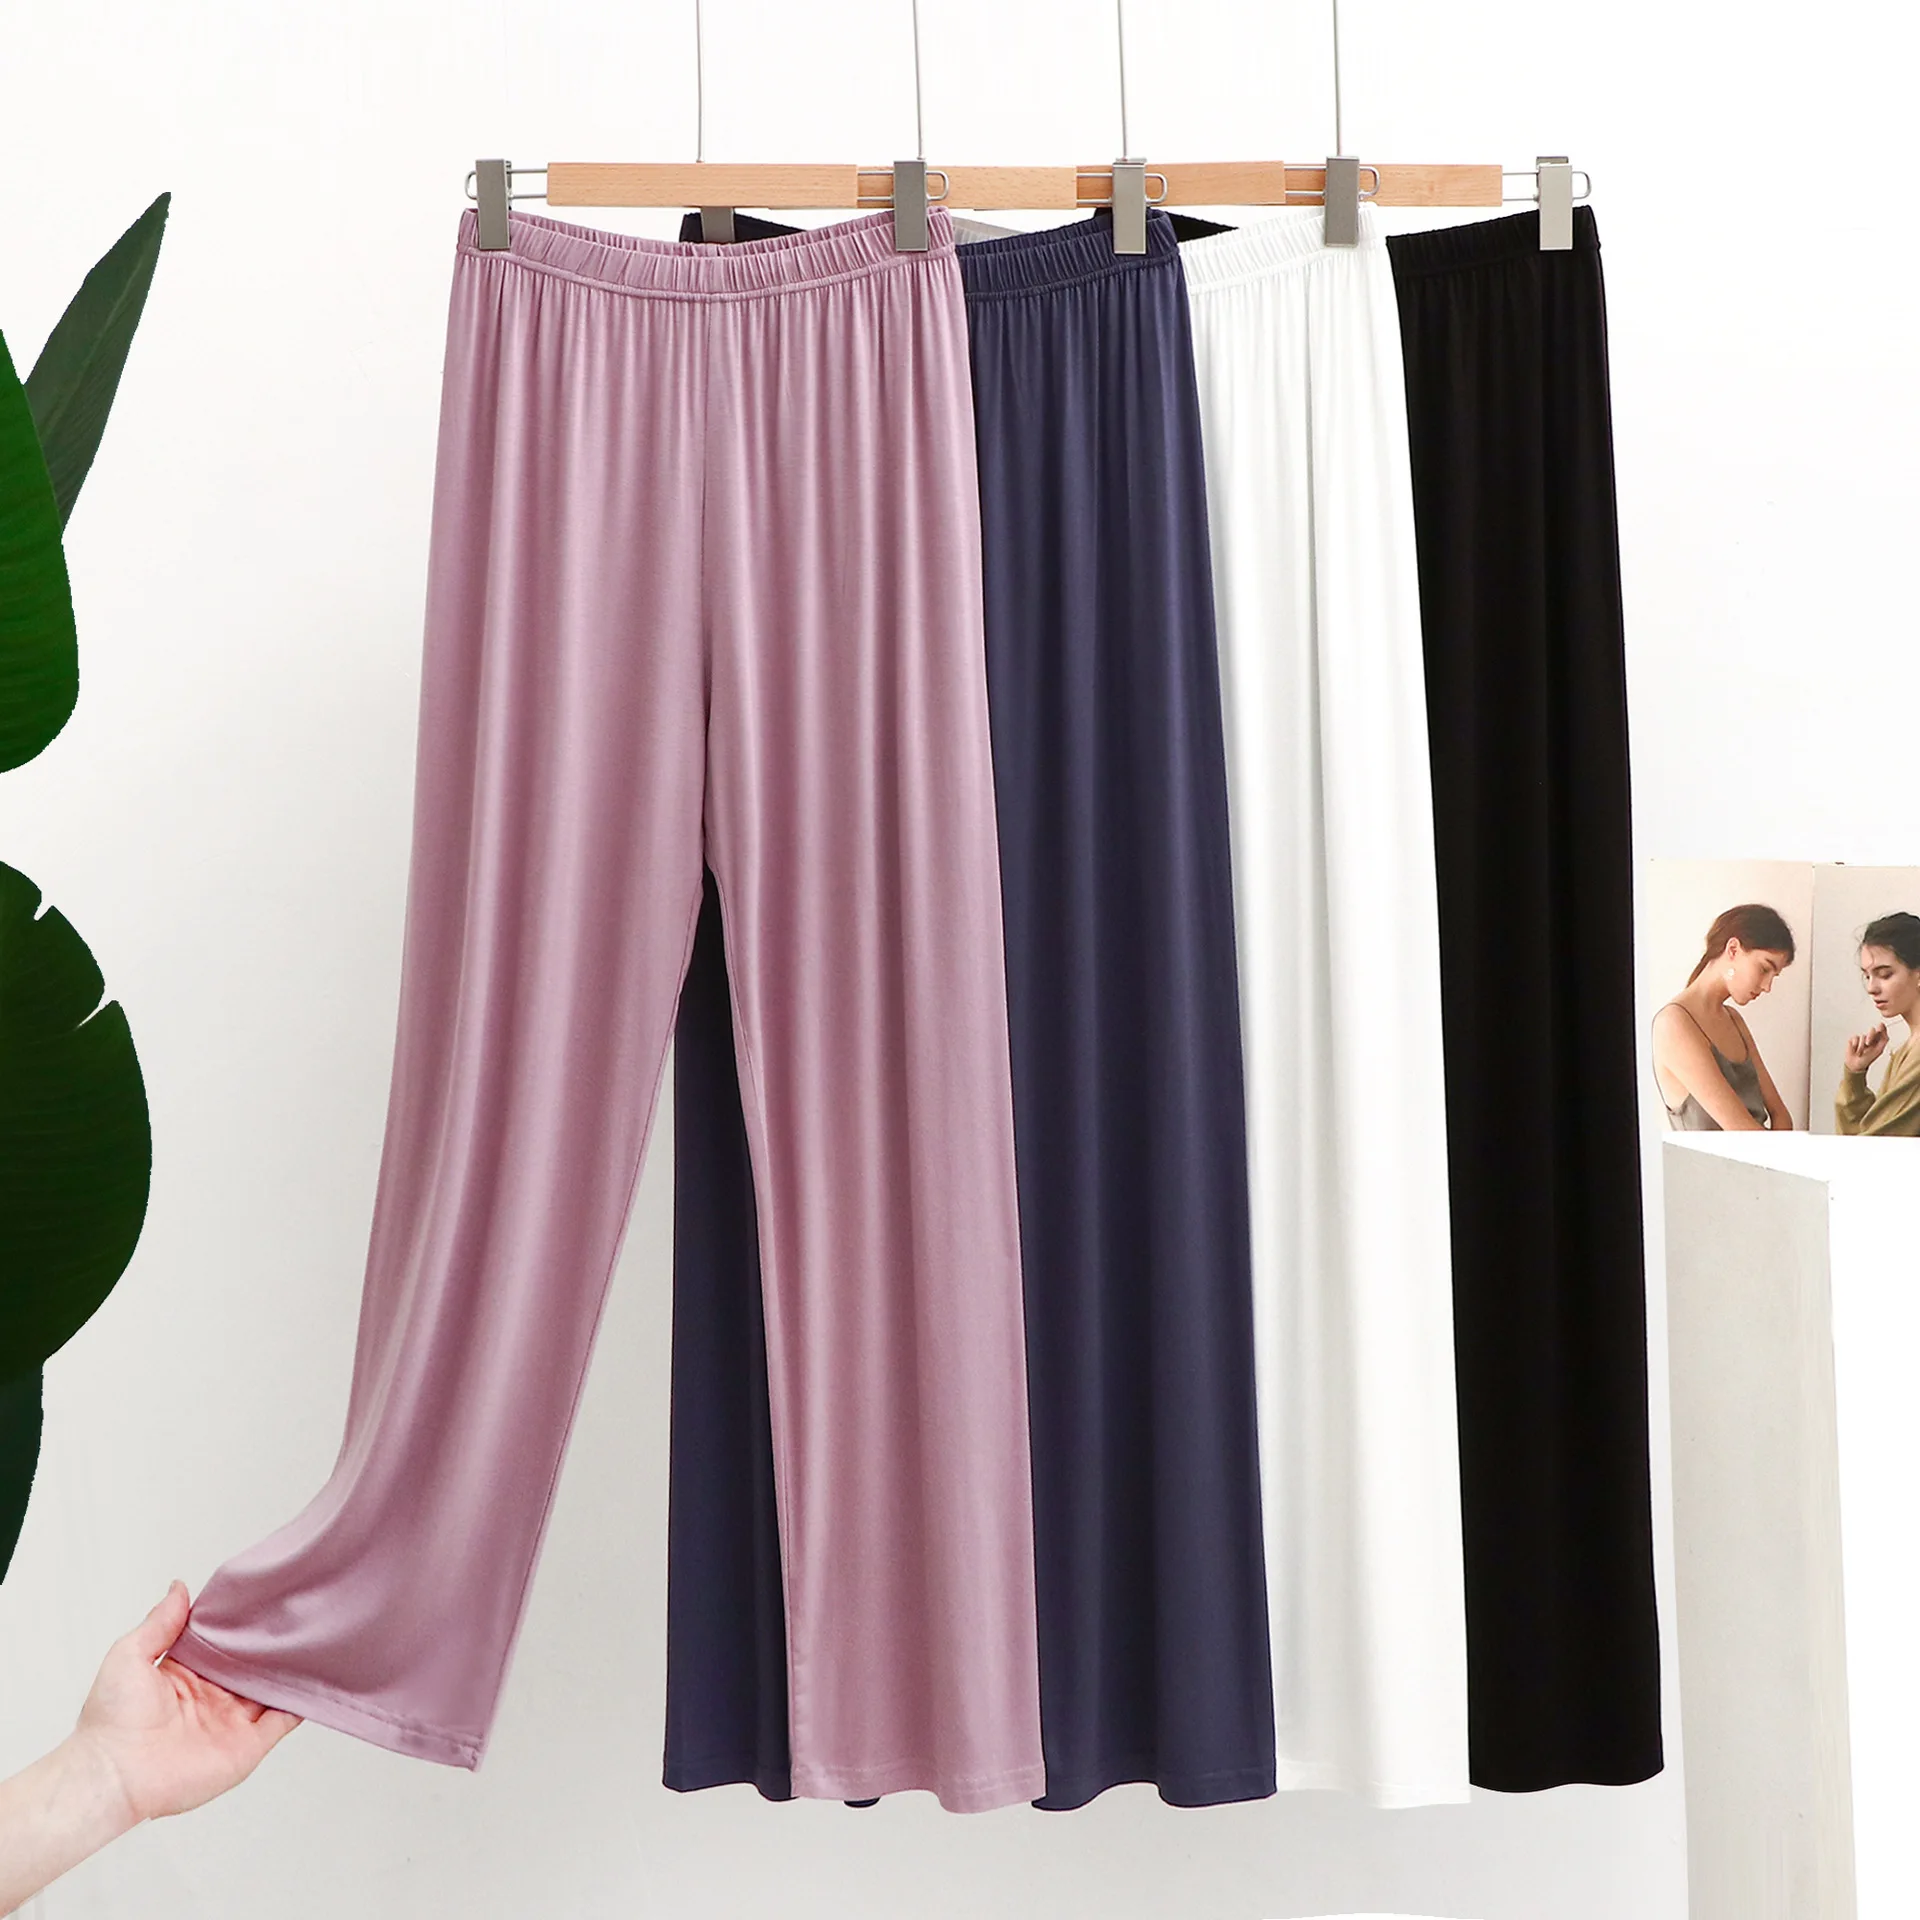 

Modal Pajama Pants Thin Homewear Mosquito Proof Long Pants Soft Smooth Draping Relaxed Casual Home Sleepwear Women Pants